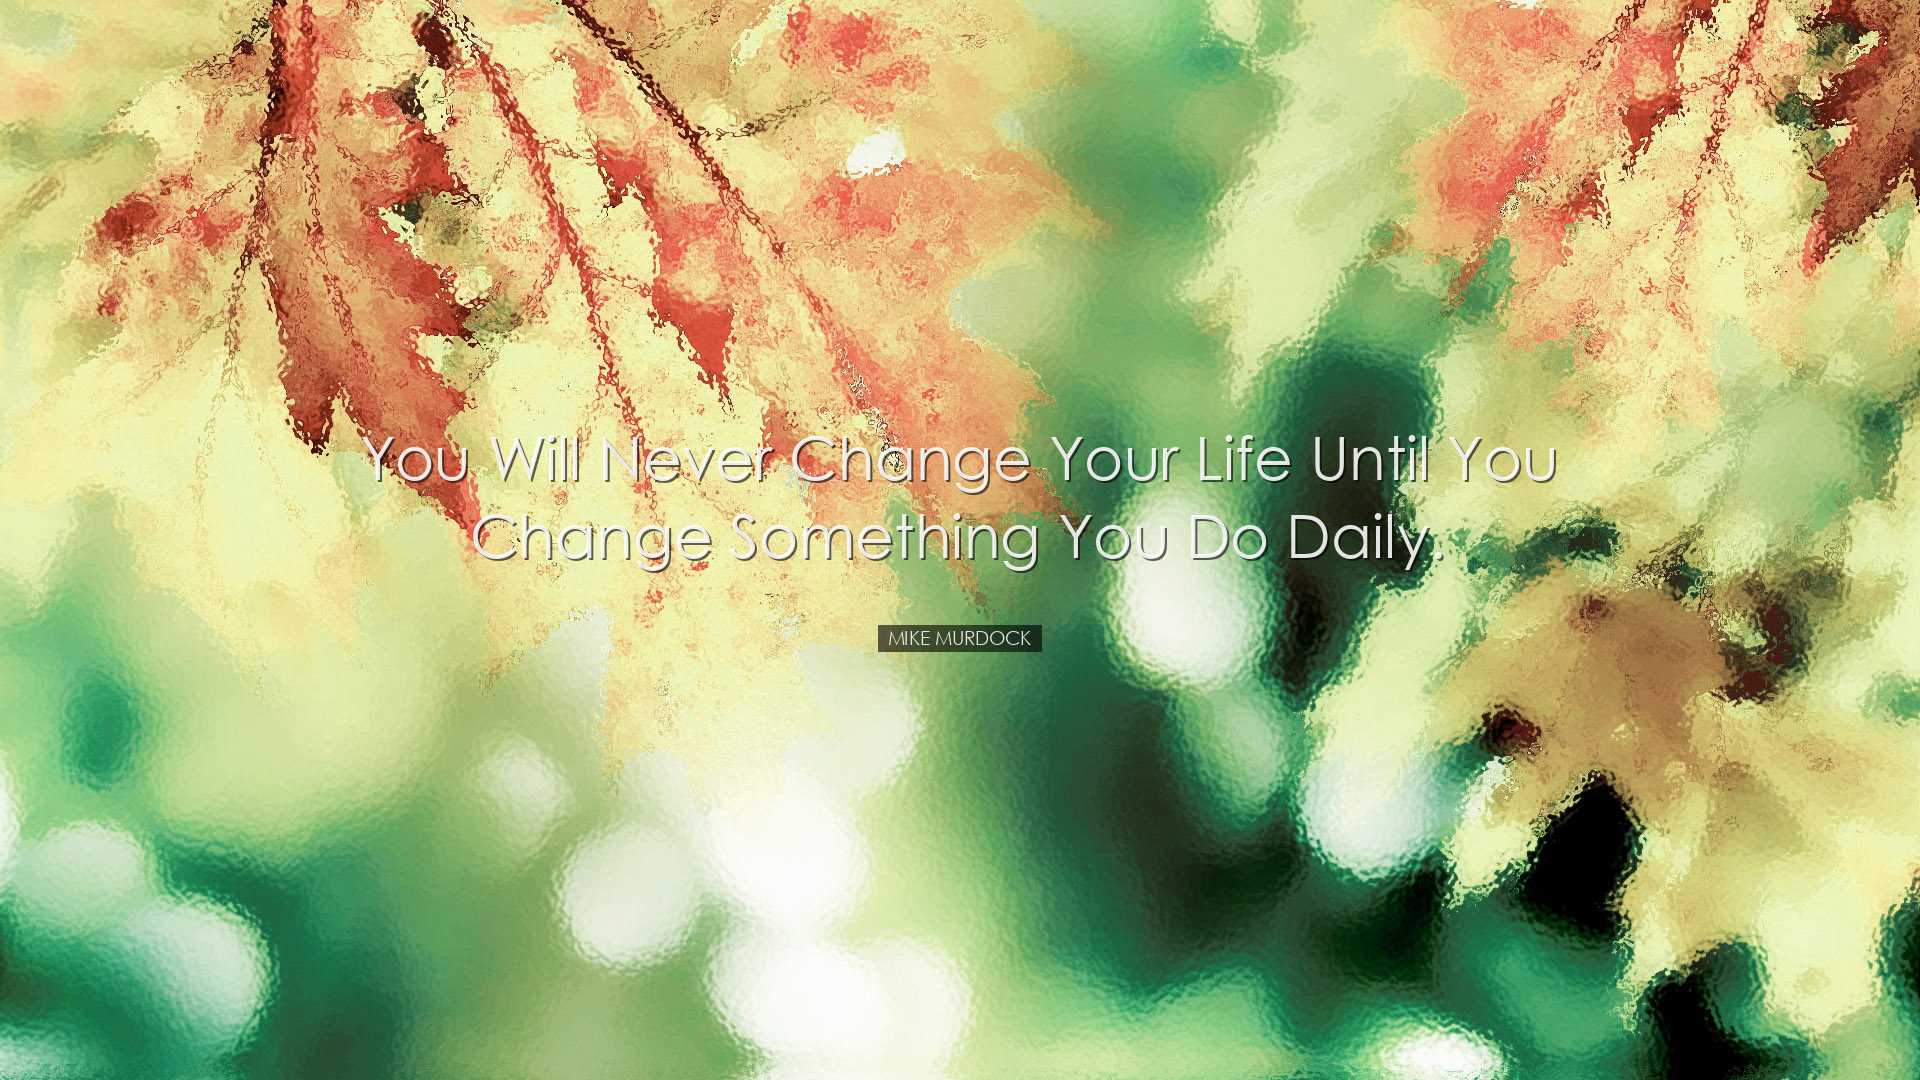 You will never change your life until you change something you do